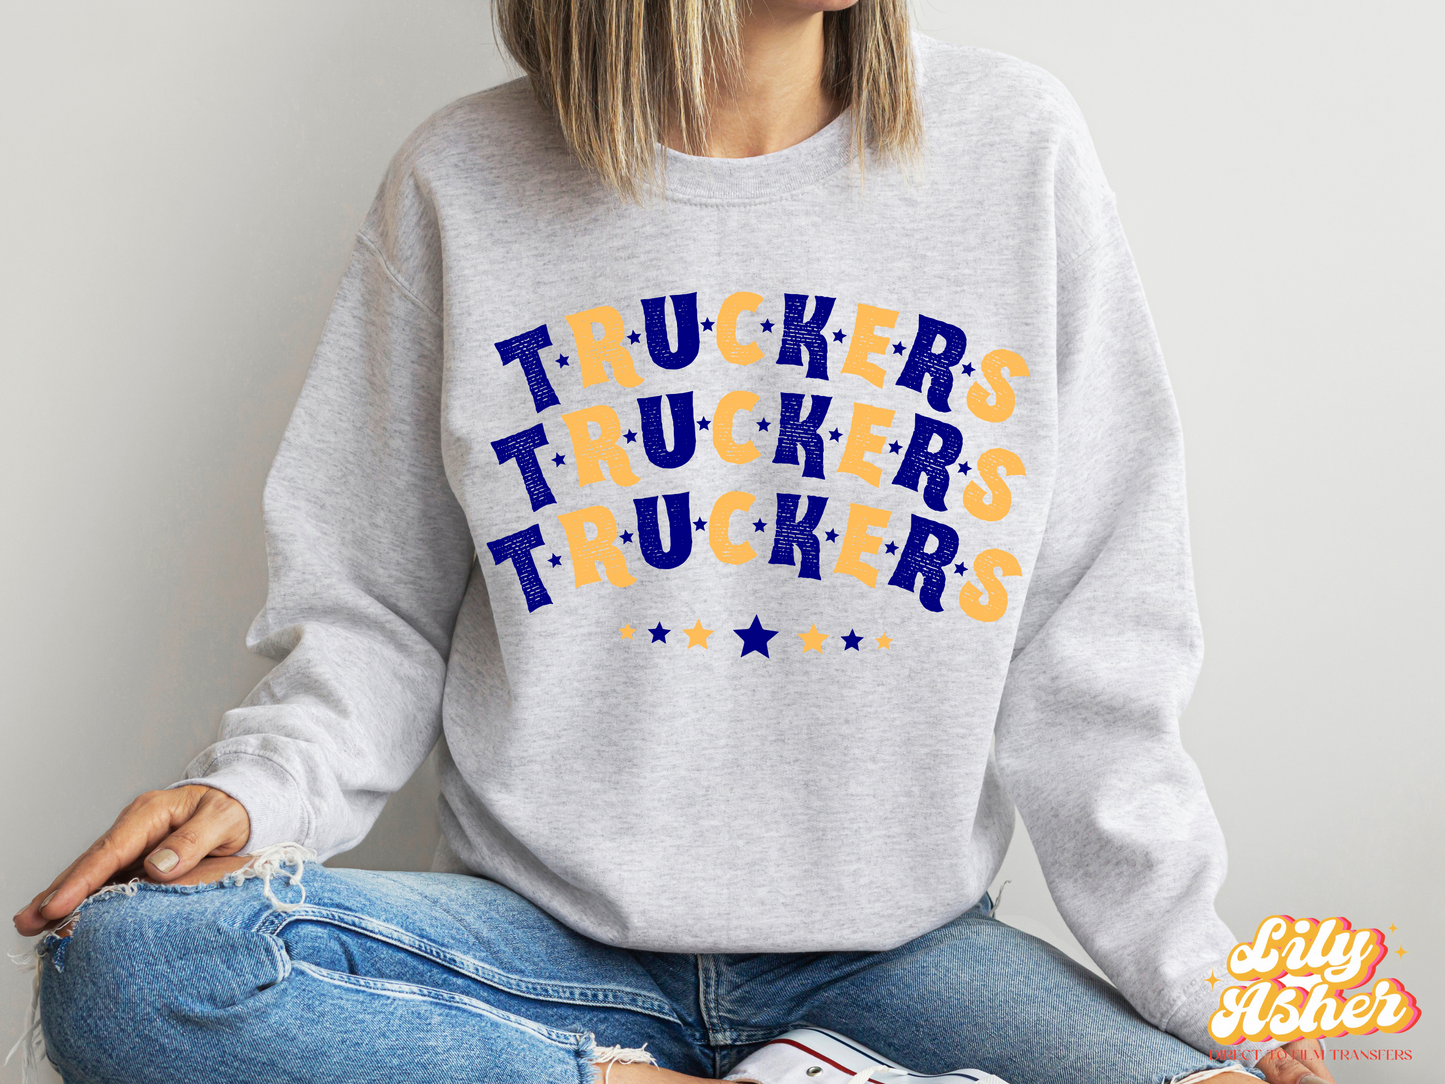 DTF TRUCKERS NAVY BLUE-YELLOW GOLD STACKED TEXT W/ STARS TRANSFER